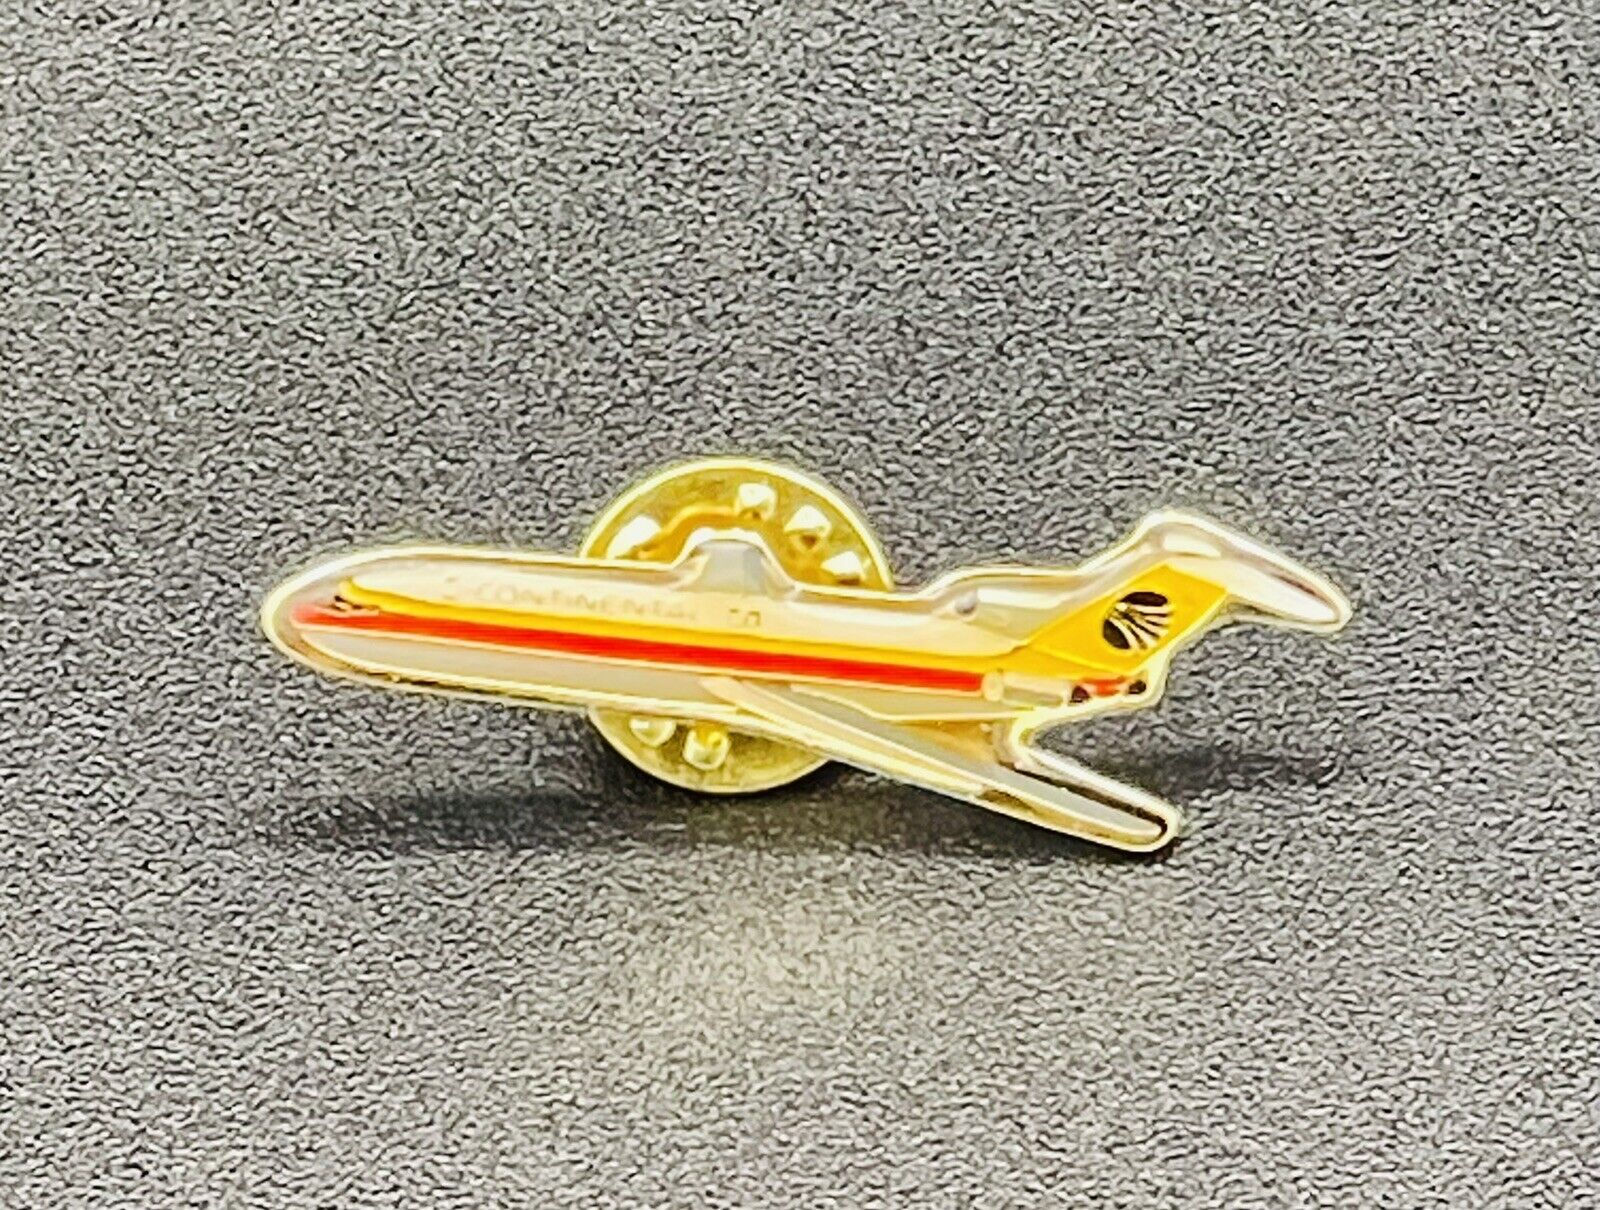 Vintage Continental Airlines Lapel Pin Aviation Collectibles